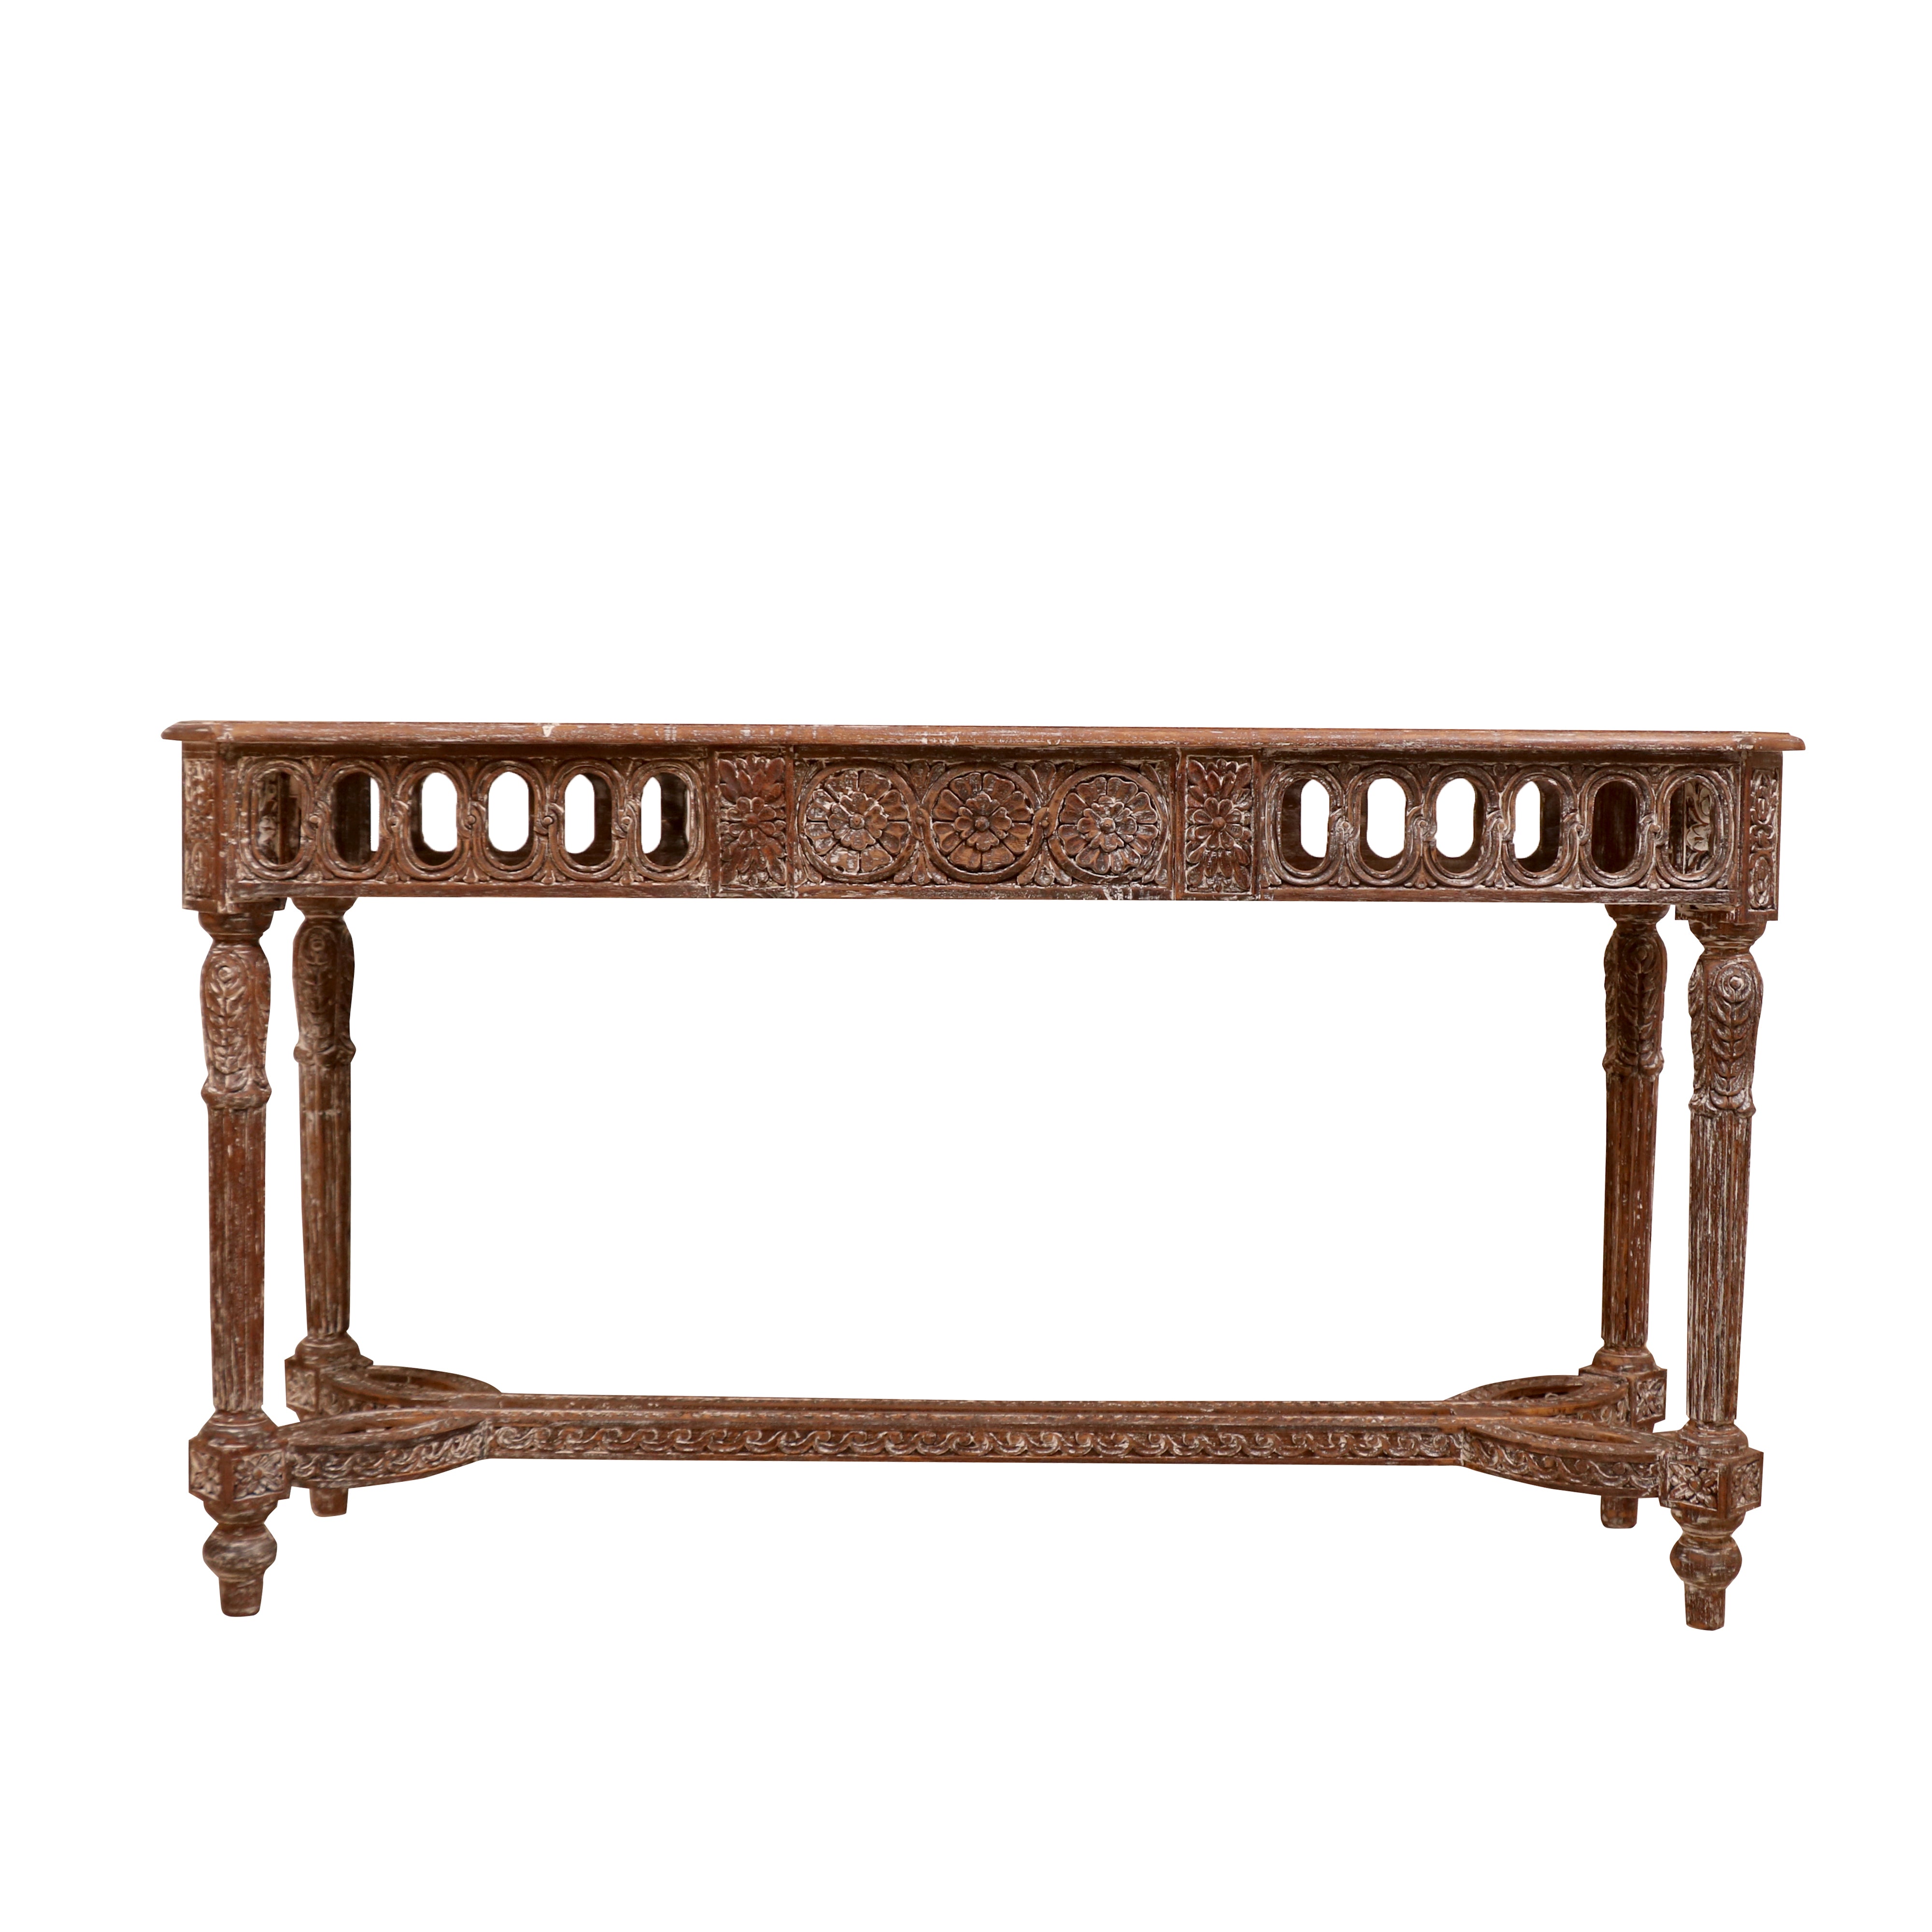 Teak wood Contemporary Design Console Table Console Table